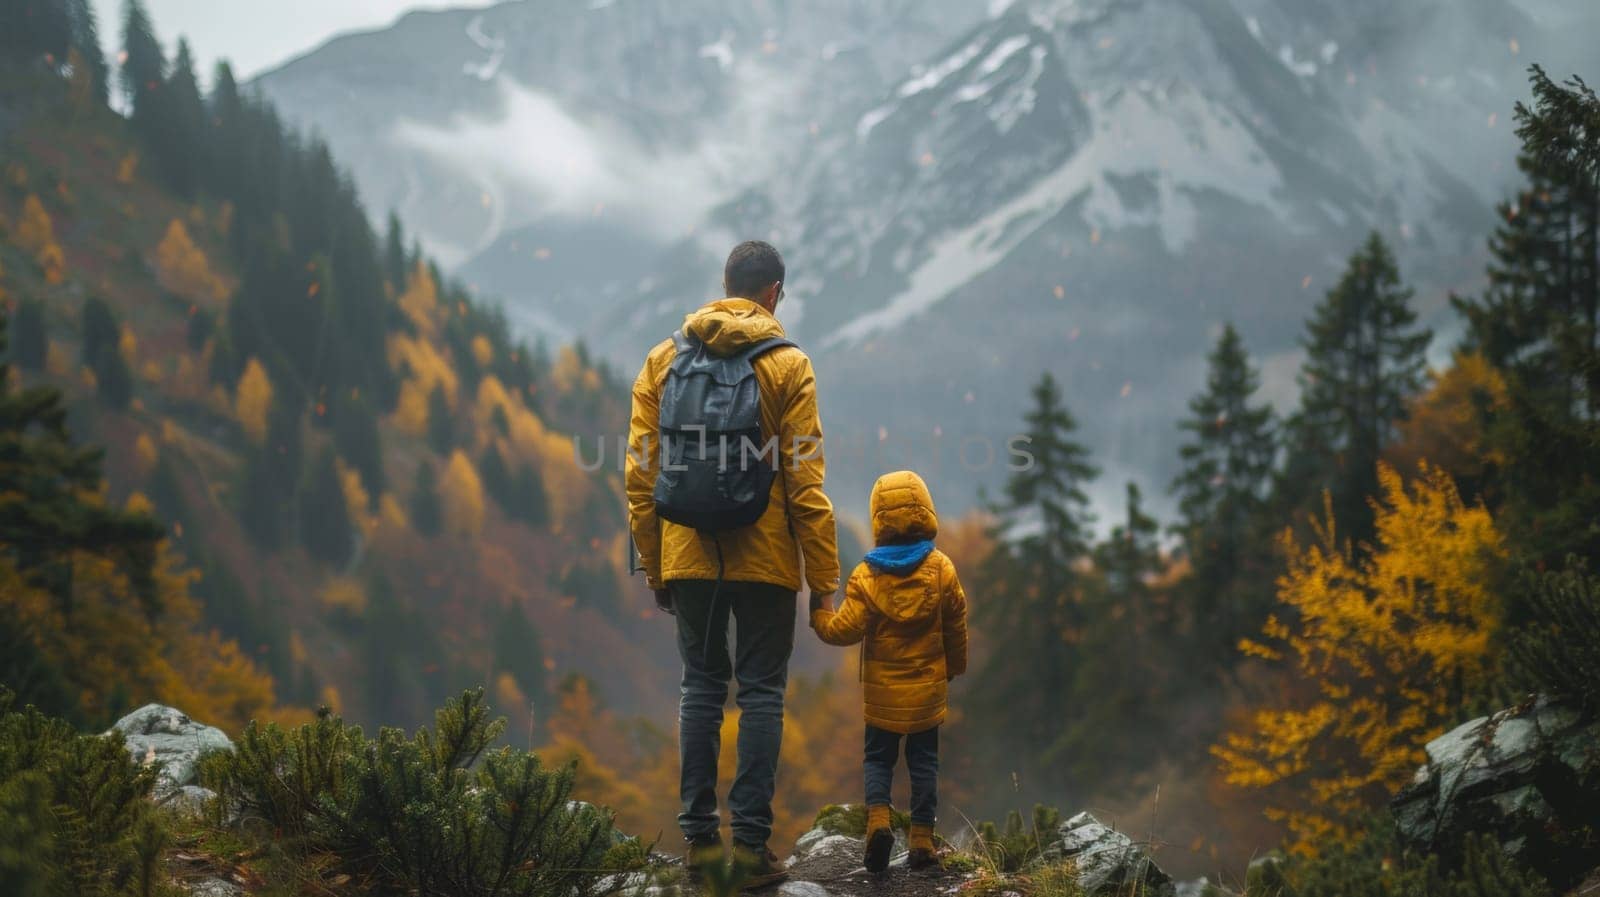 A man and child walking on a trail in the mountains